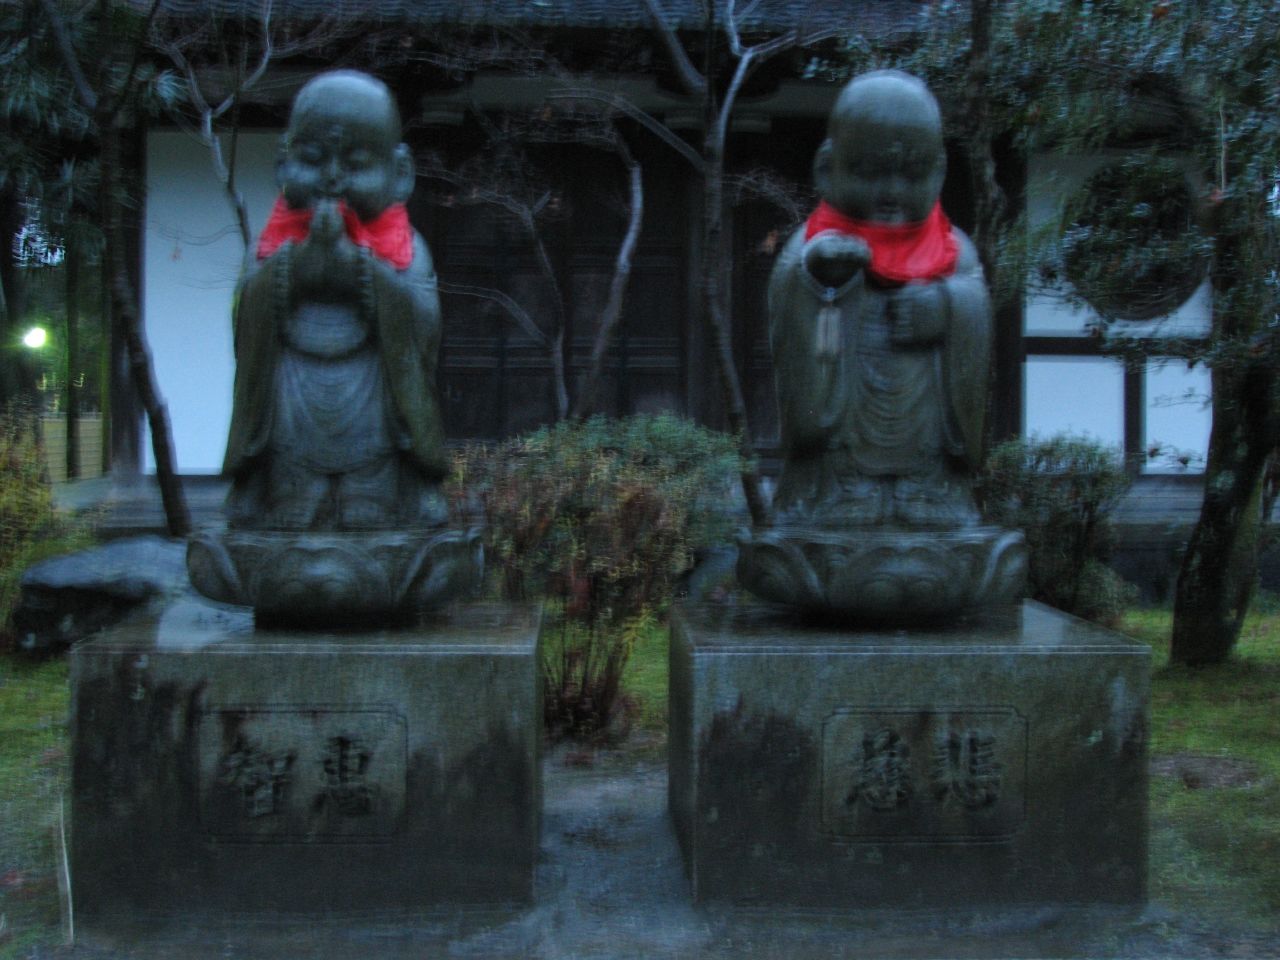 two small statues sitting on top of a bench